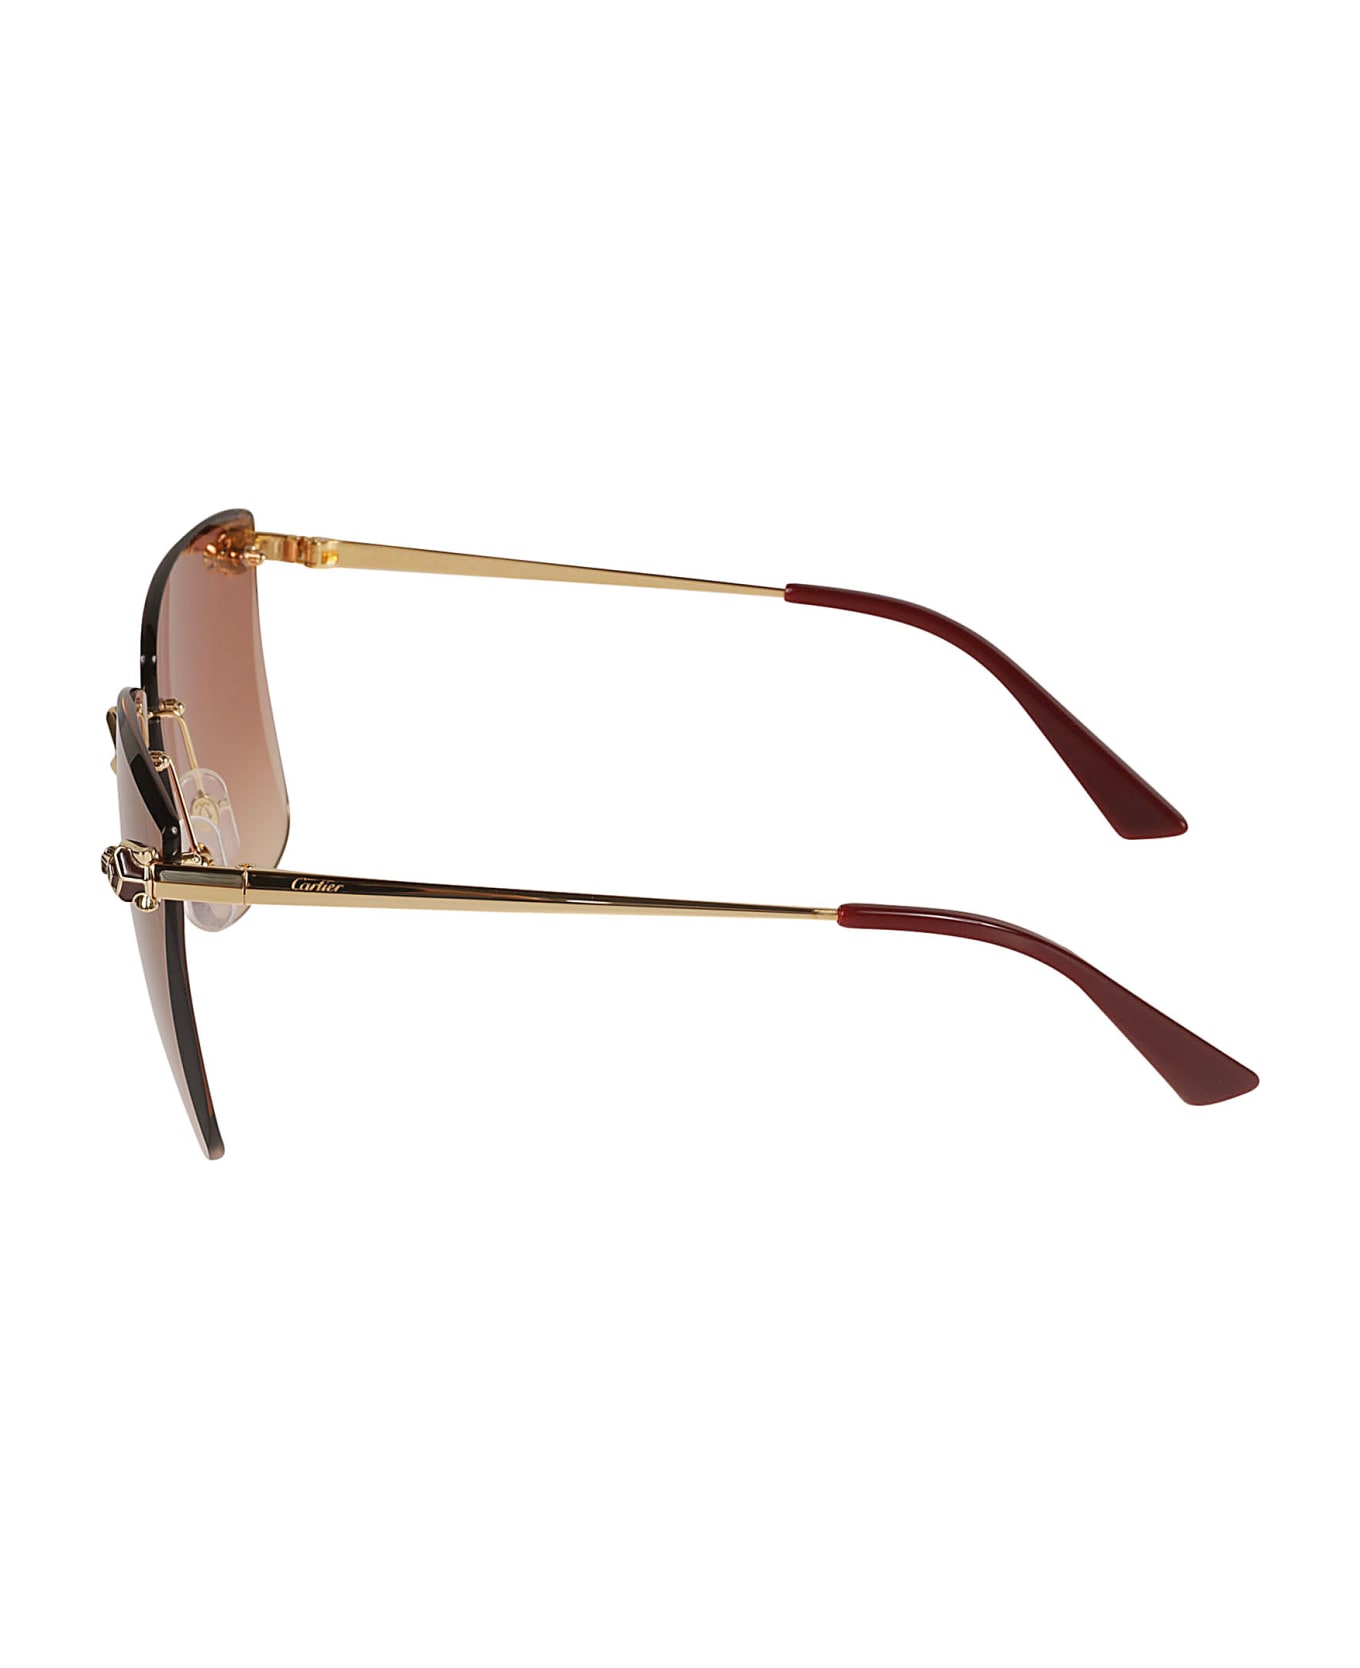 Cartier Eyewear Square Patterned Sunglasses - Gold